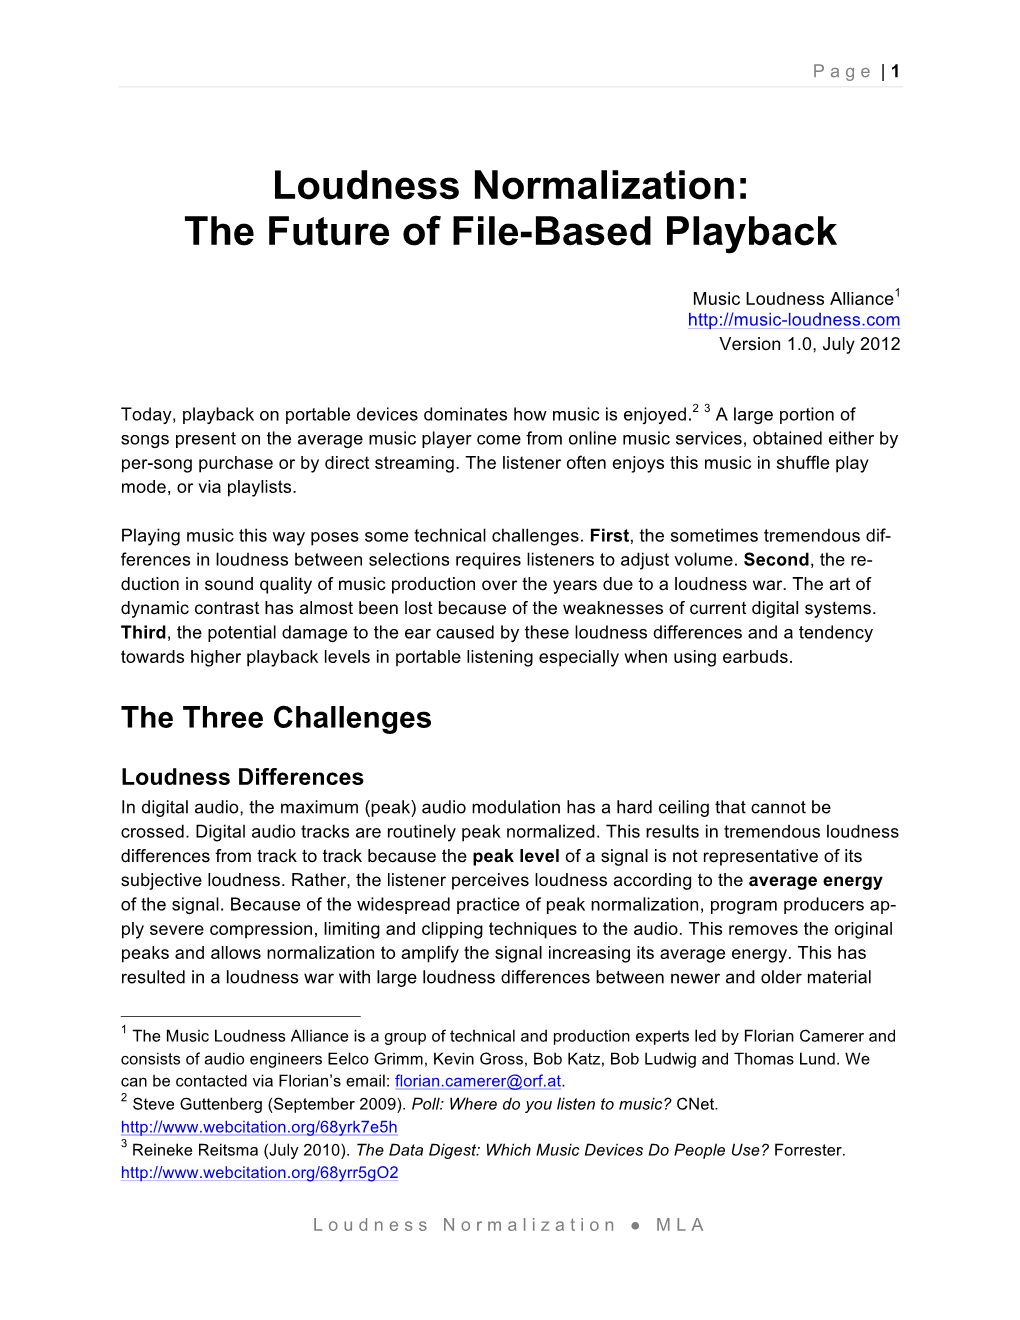 Loudness Normalization: the Future of File-Based Playback